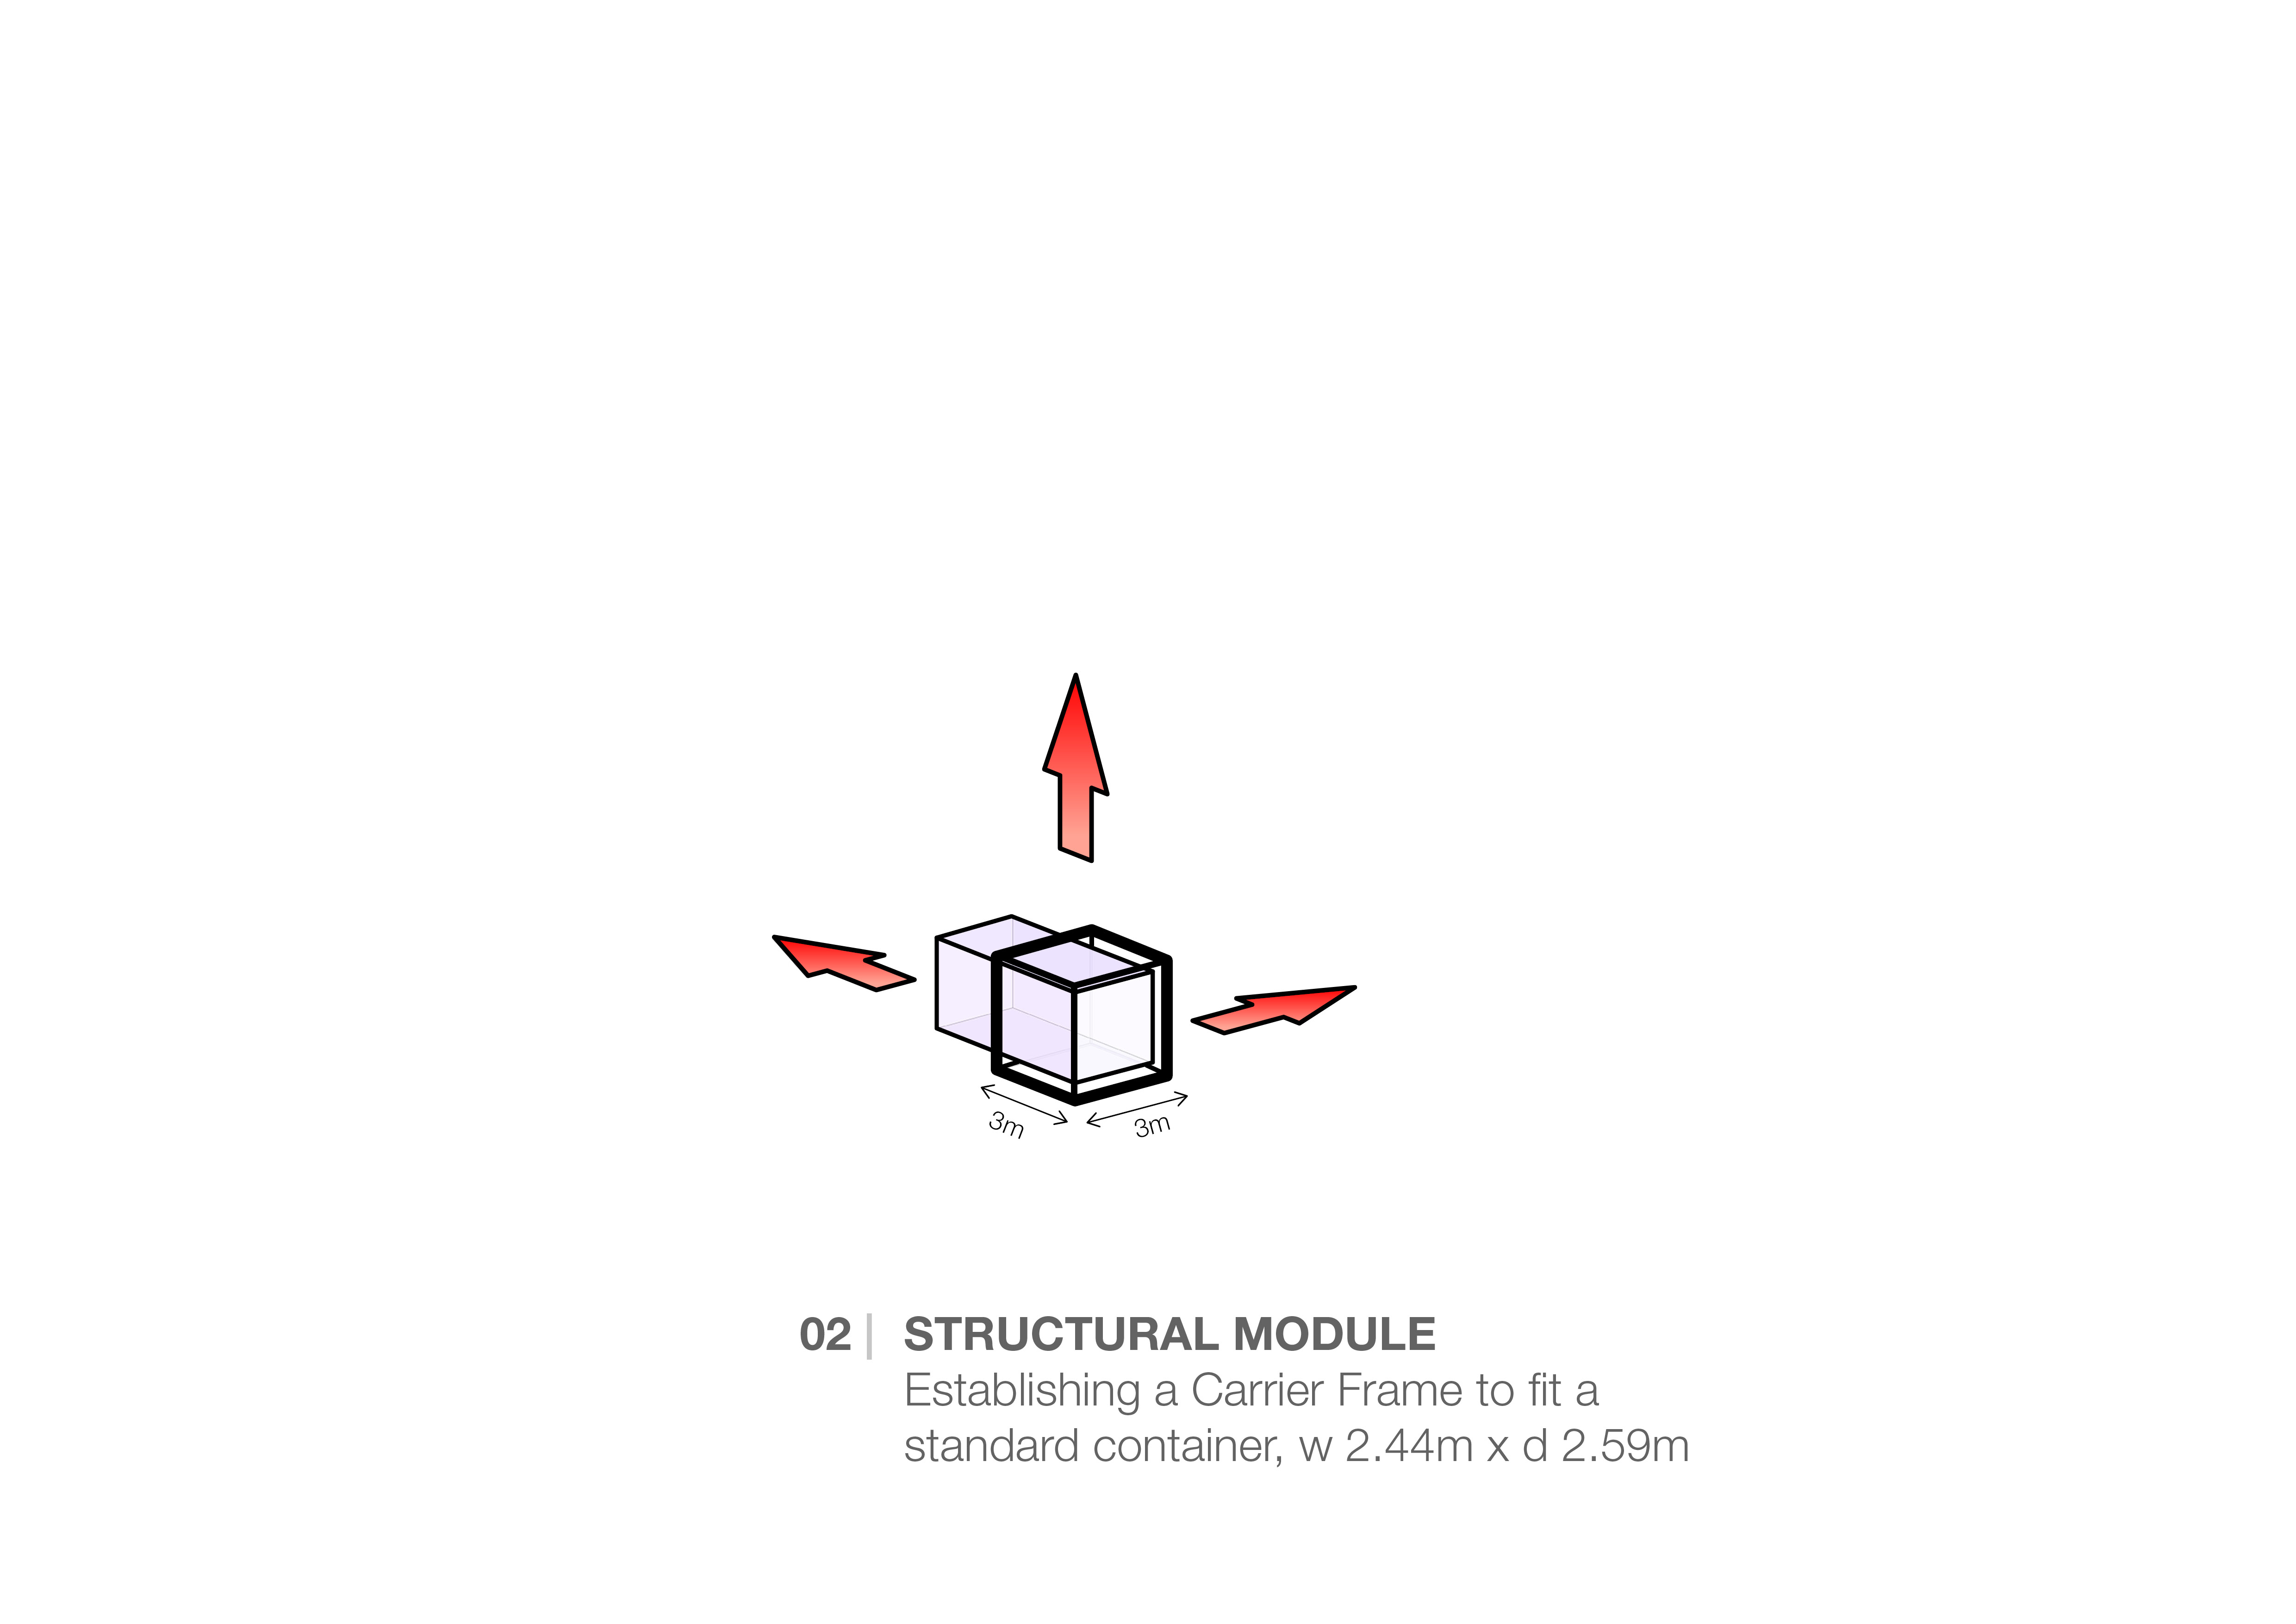 The Cube - Pavilion - International Container Arts Festival 2021 - Kaohsiung, Taiwan - Concept Diagram - 2